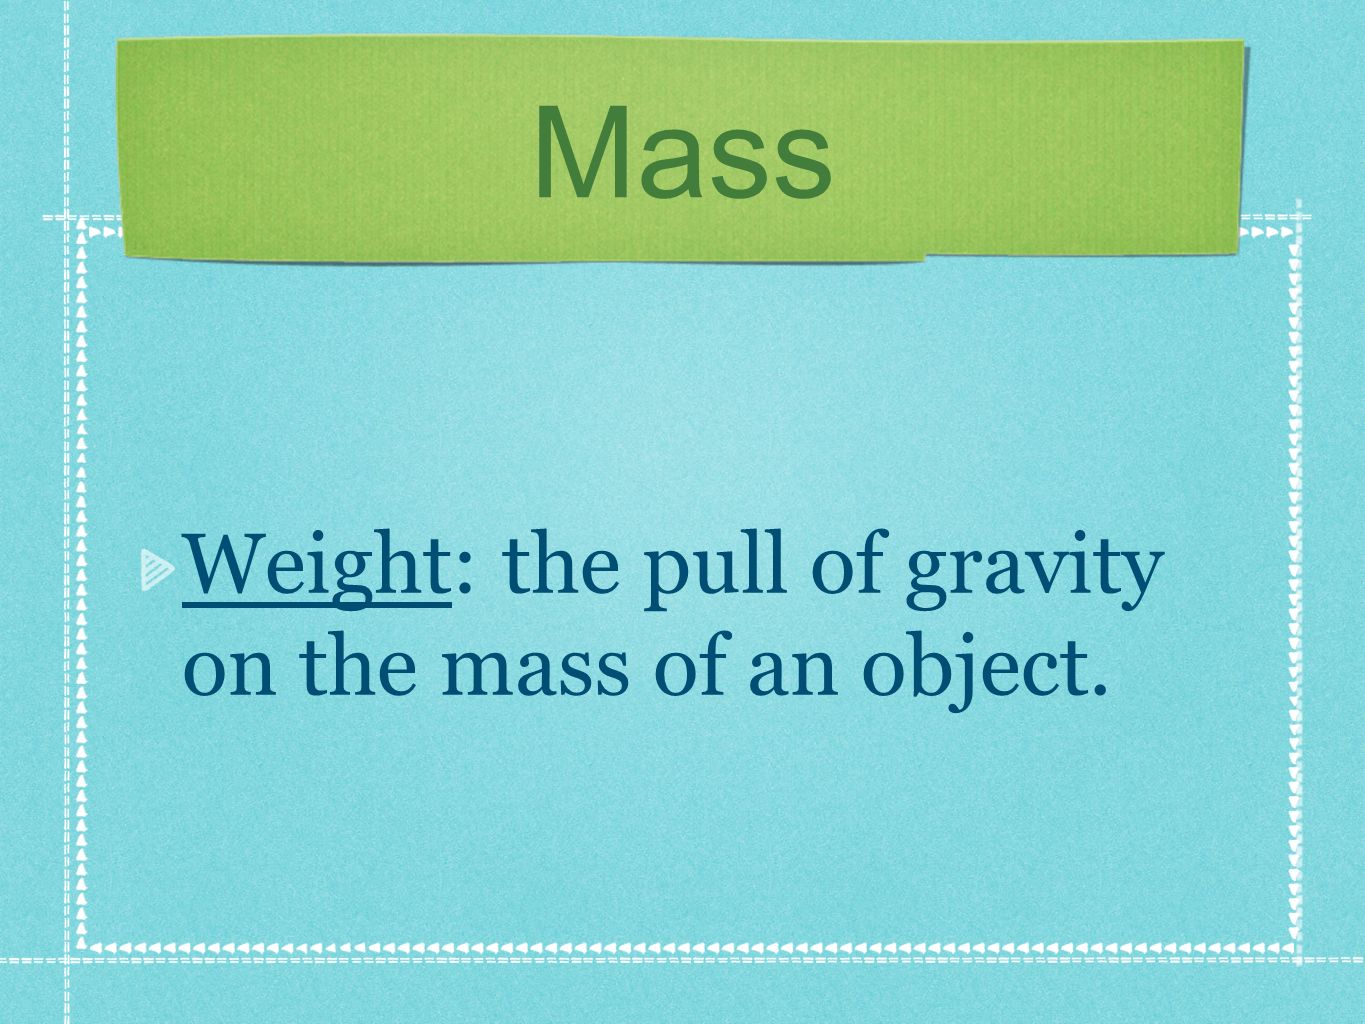 Mass Weight: the pull of gravity on the mass of an object.